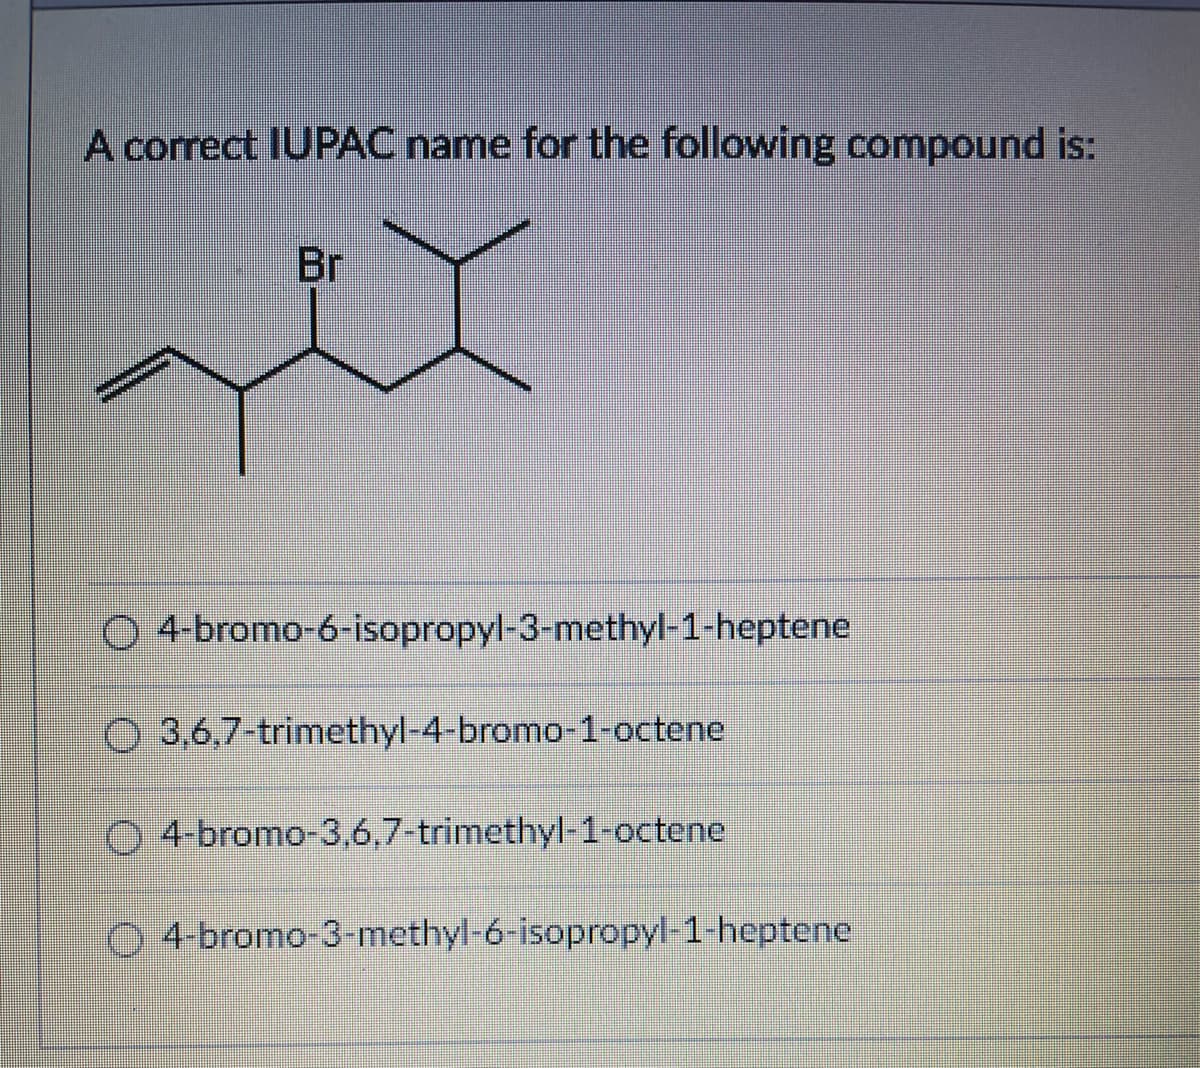 A correct IUPAC name for the following compound is:
Br
xix
Ⓒ4-bromo-6-isopropyl-3-methyl-1-heptene
3,6,7-trimethyl-4-bromo-1-octene.
4-bromo-3,6,7-trimethyl-1-octene
Ⓒ4-bromo-3-methyl-6-isopropyl-1-heptene